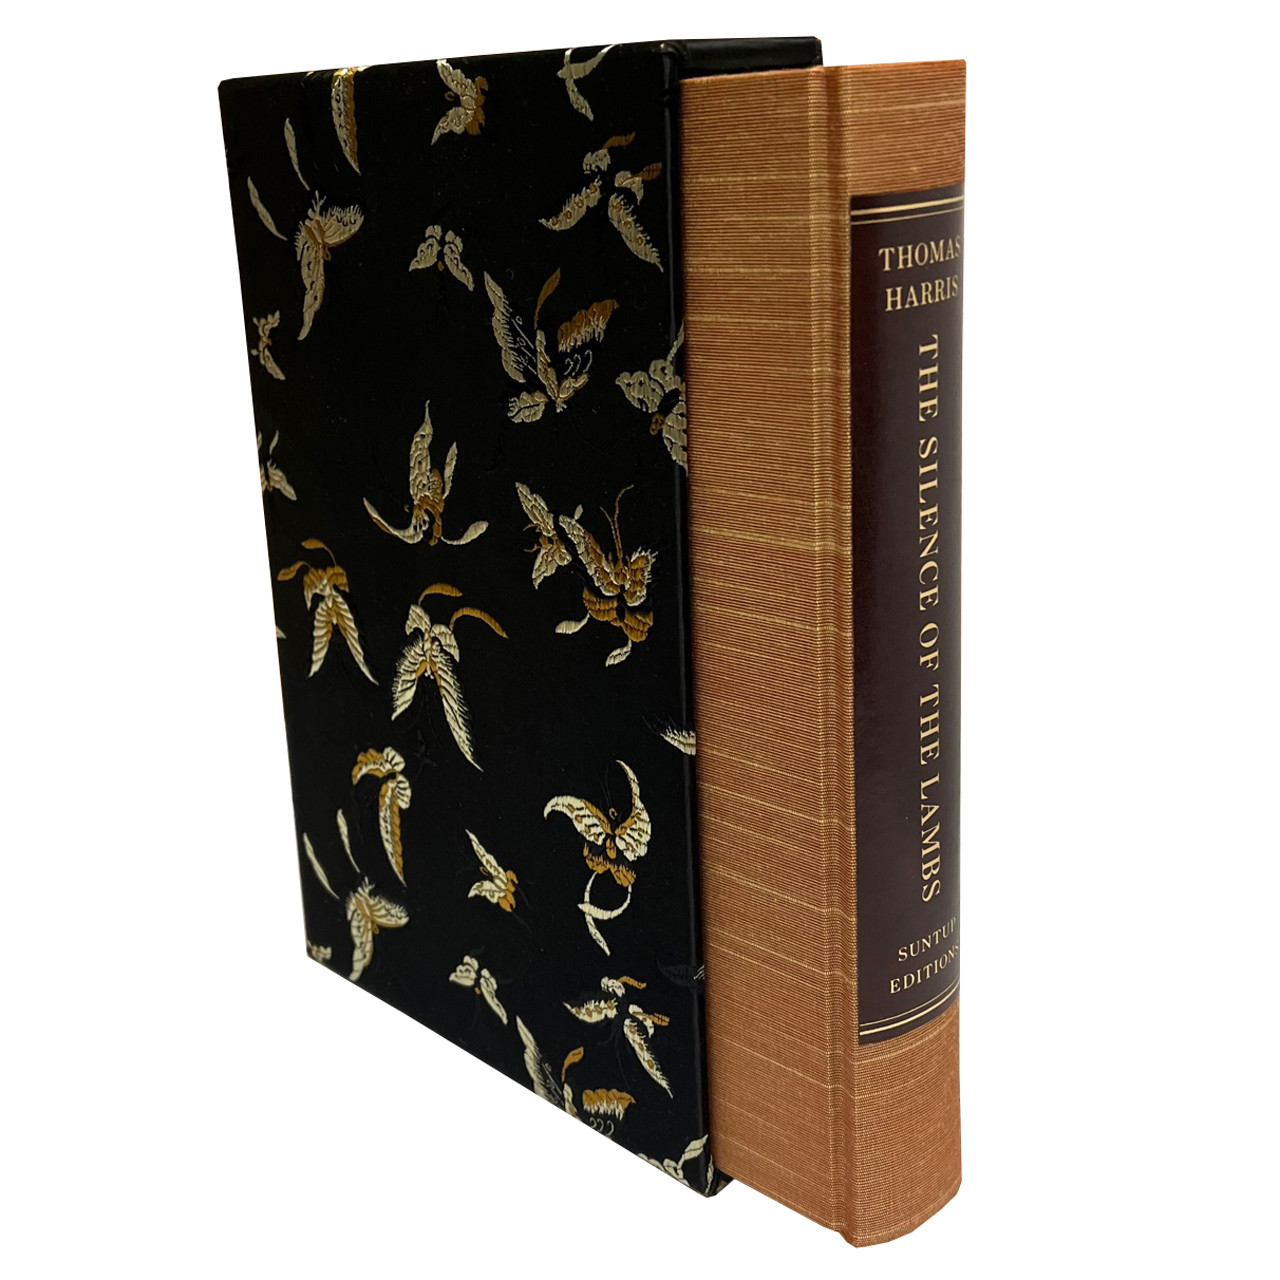 Thomas Harris "Silence of the Lambs" Slipcased Signed Limited Edition No. 90 of 350  [Very Fine]